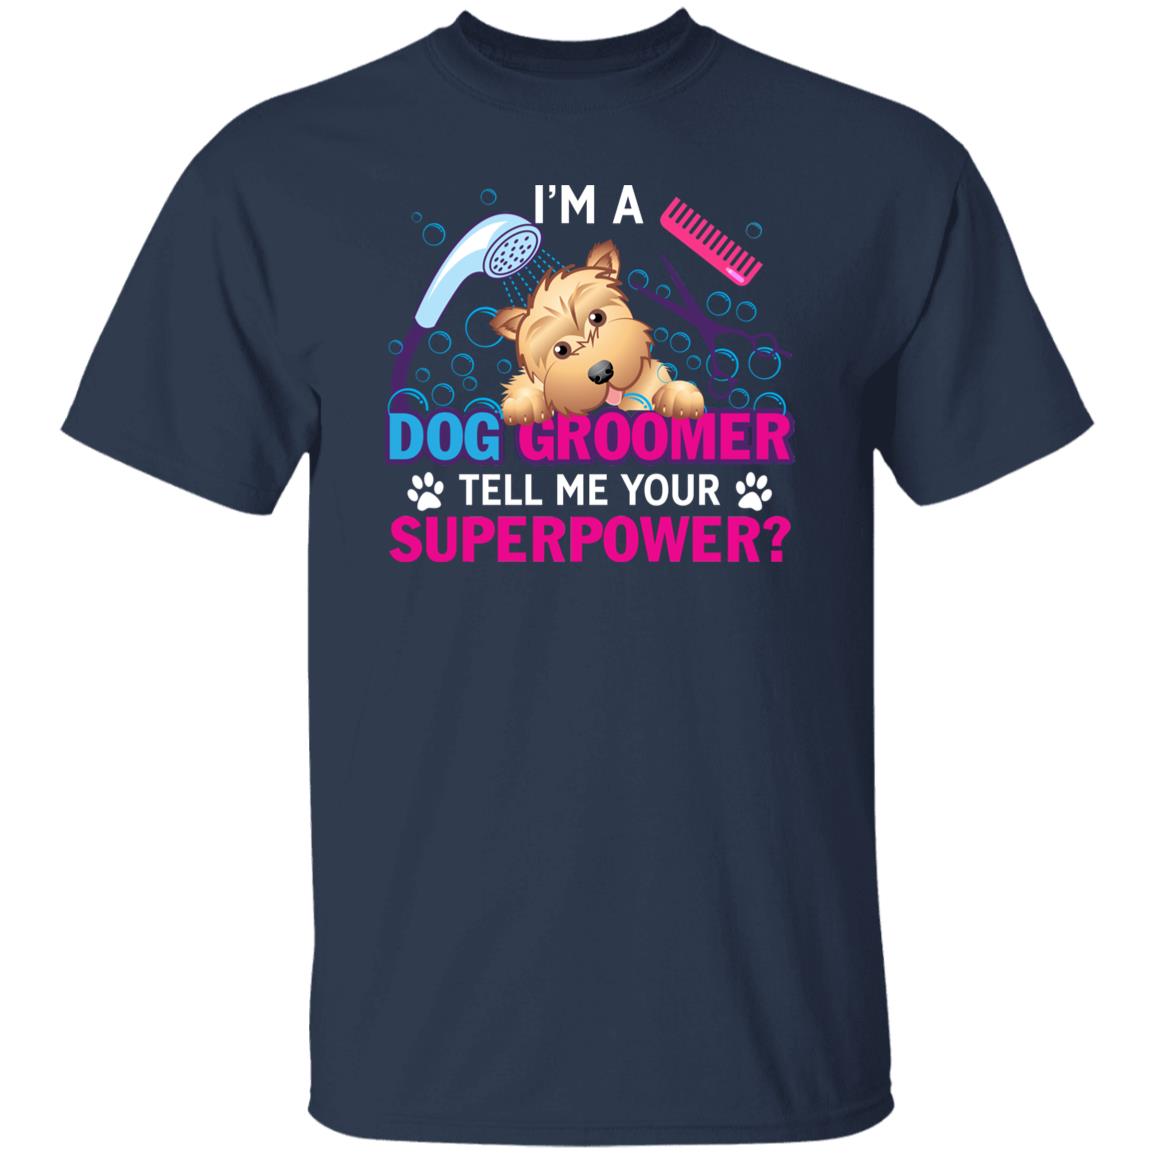 I'm a dog groomer tell me your superpower Unisex t-shirt gift black navy dark heather-Family-Gift-Planet